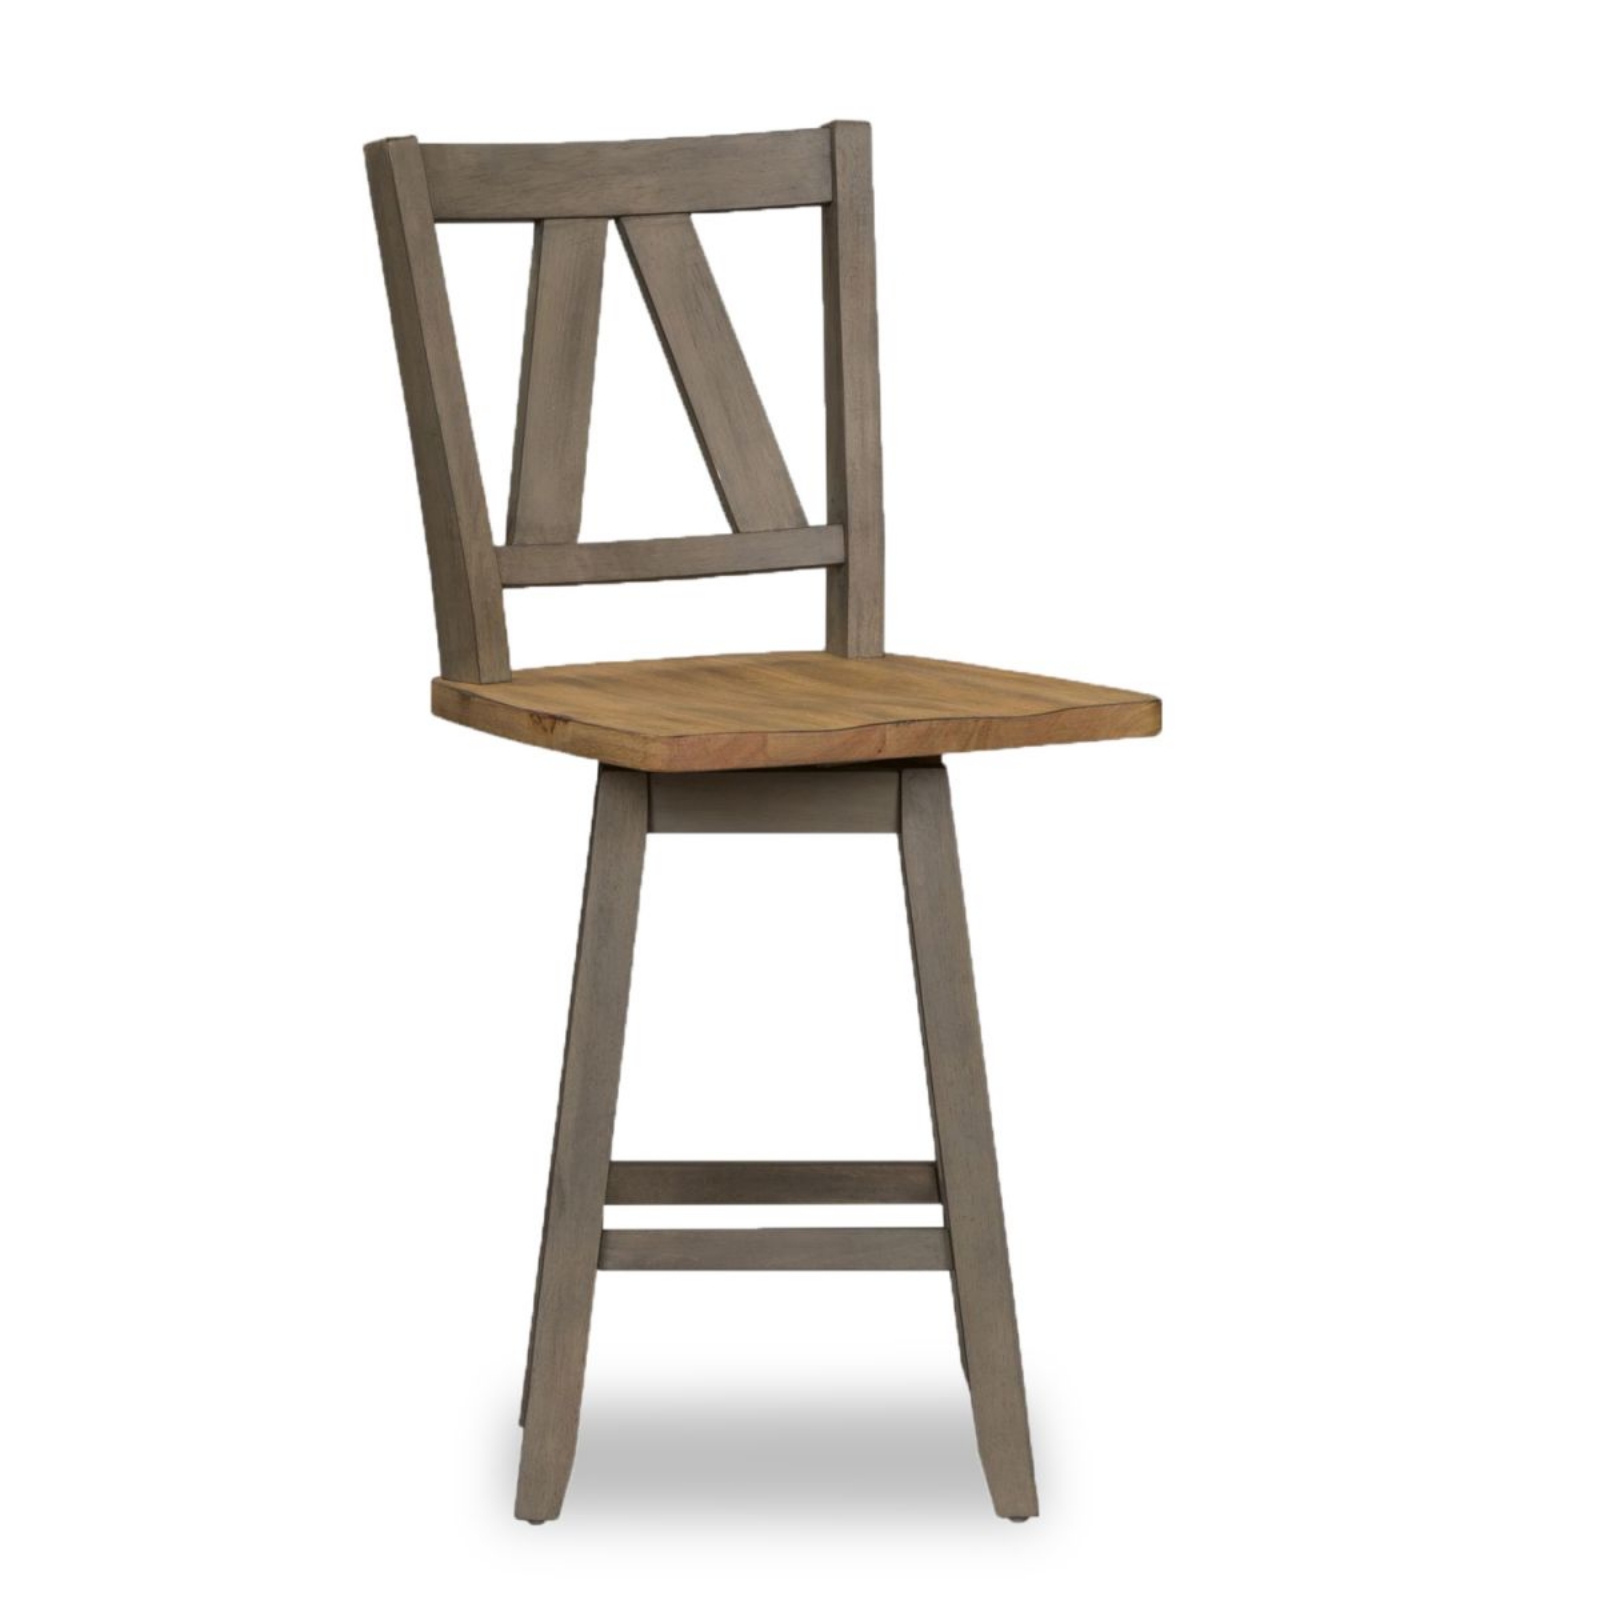 Picture of Lindsey Farm Counter Height Barstool